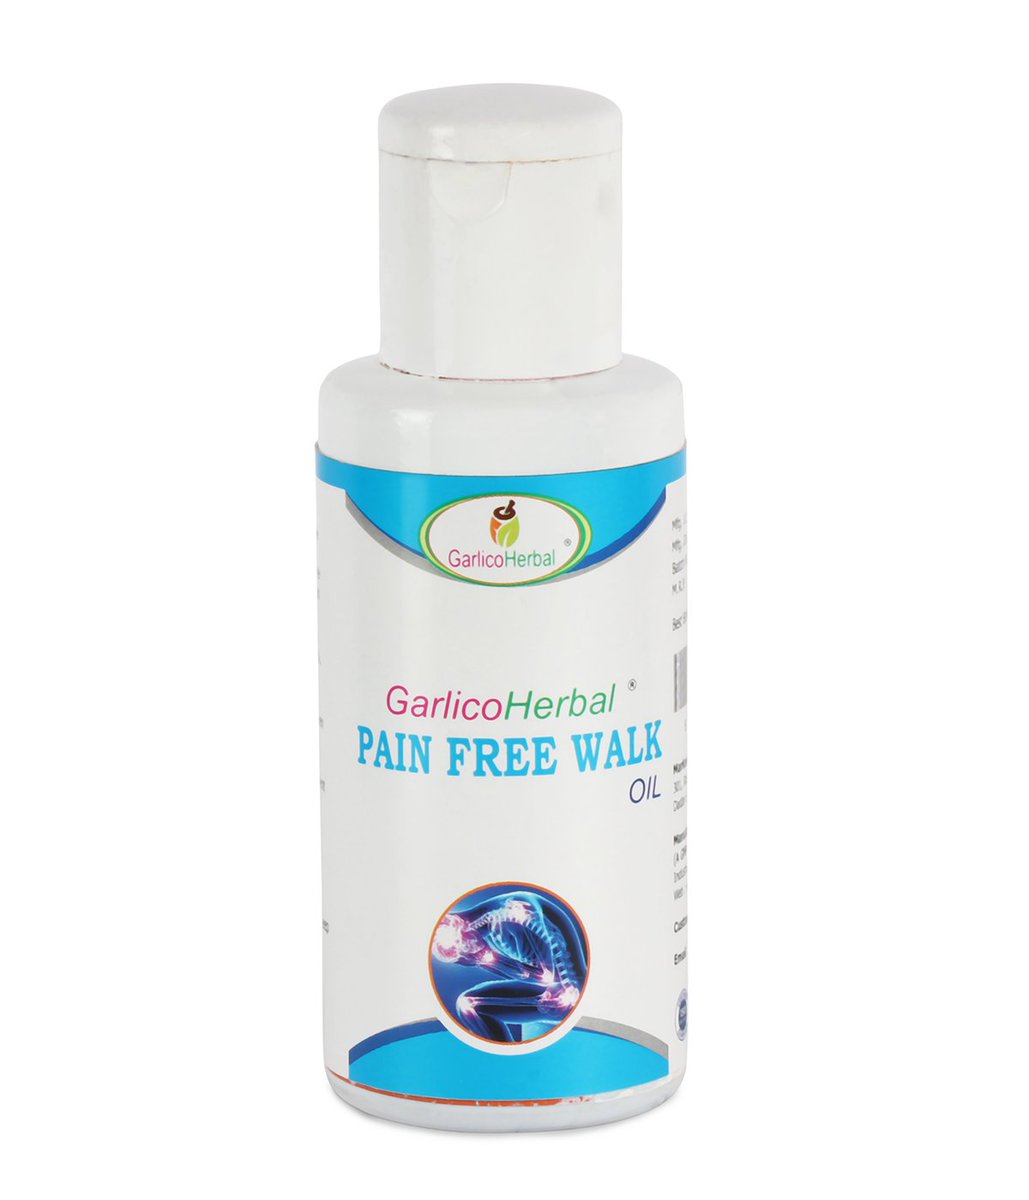 Joint diseases may become nightmare for the one who is already suffering from it. pain-free walk Oil is natural herbal oil packed with herbal actives.

#AyurvedicMedicineforJointPain #JointHealth #JointIssue #JointDisease #NaturalJointCare